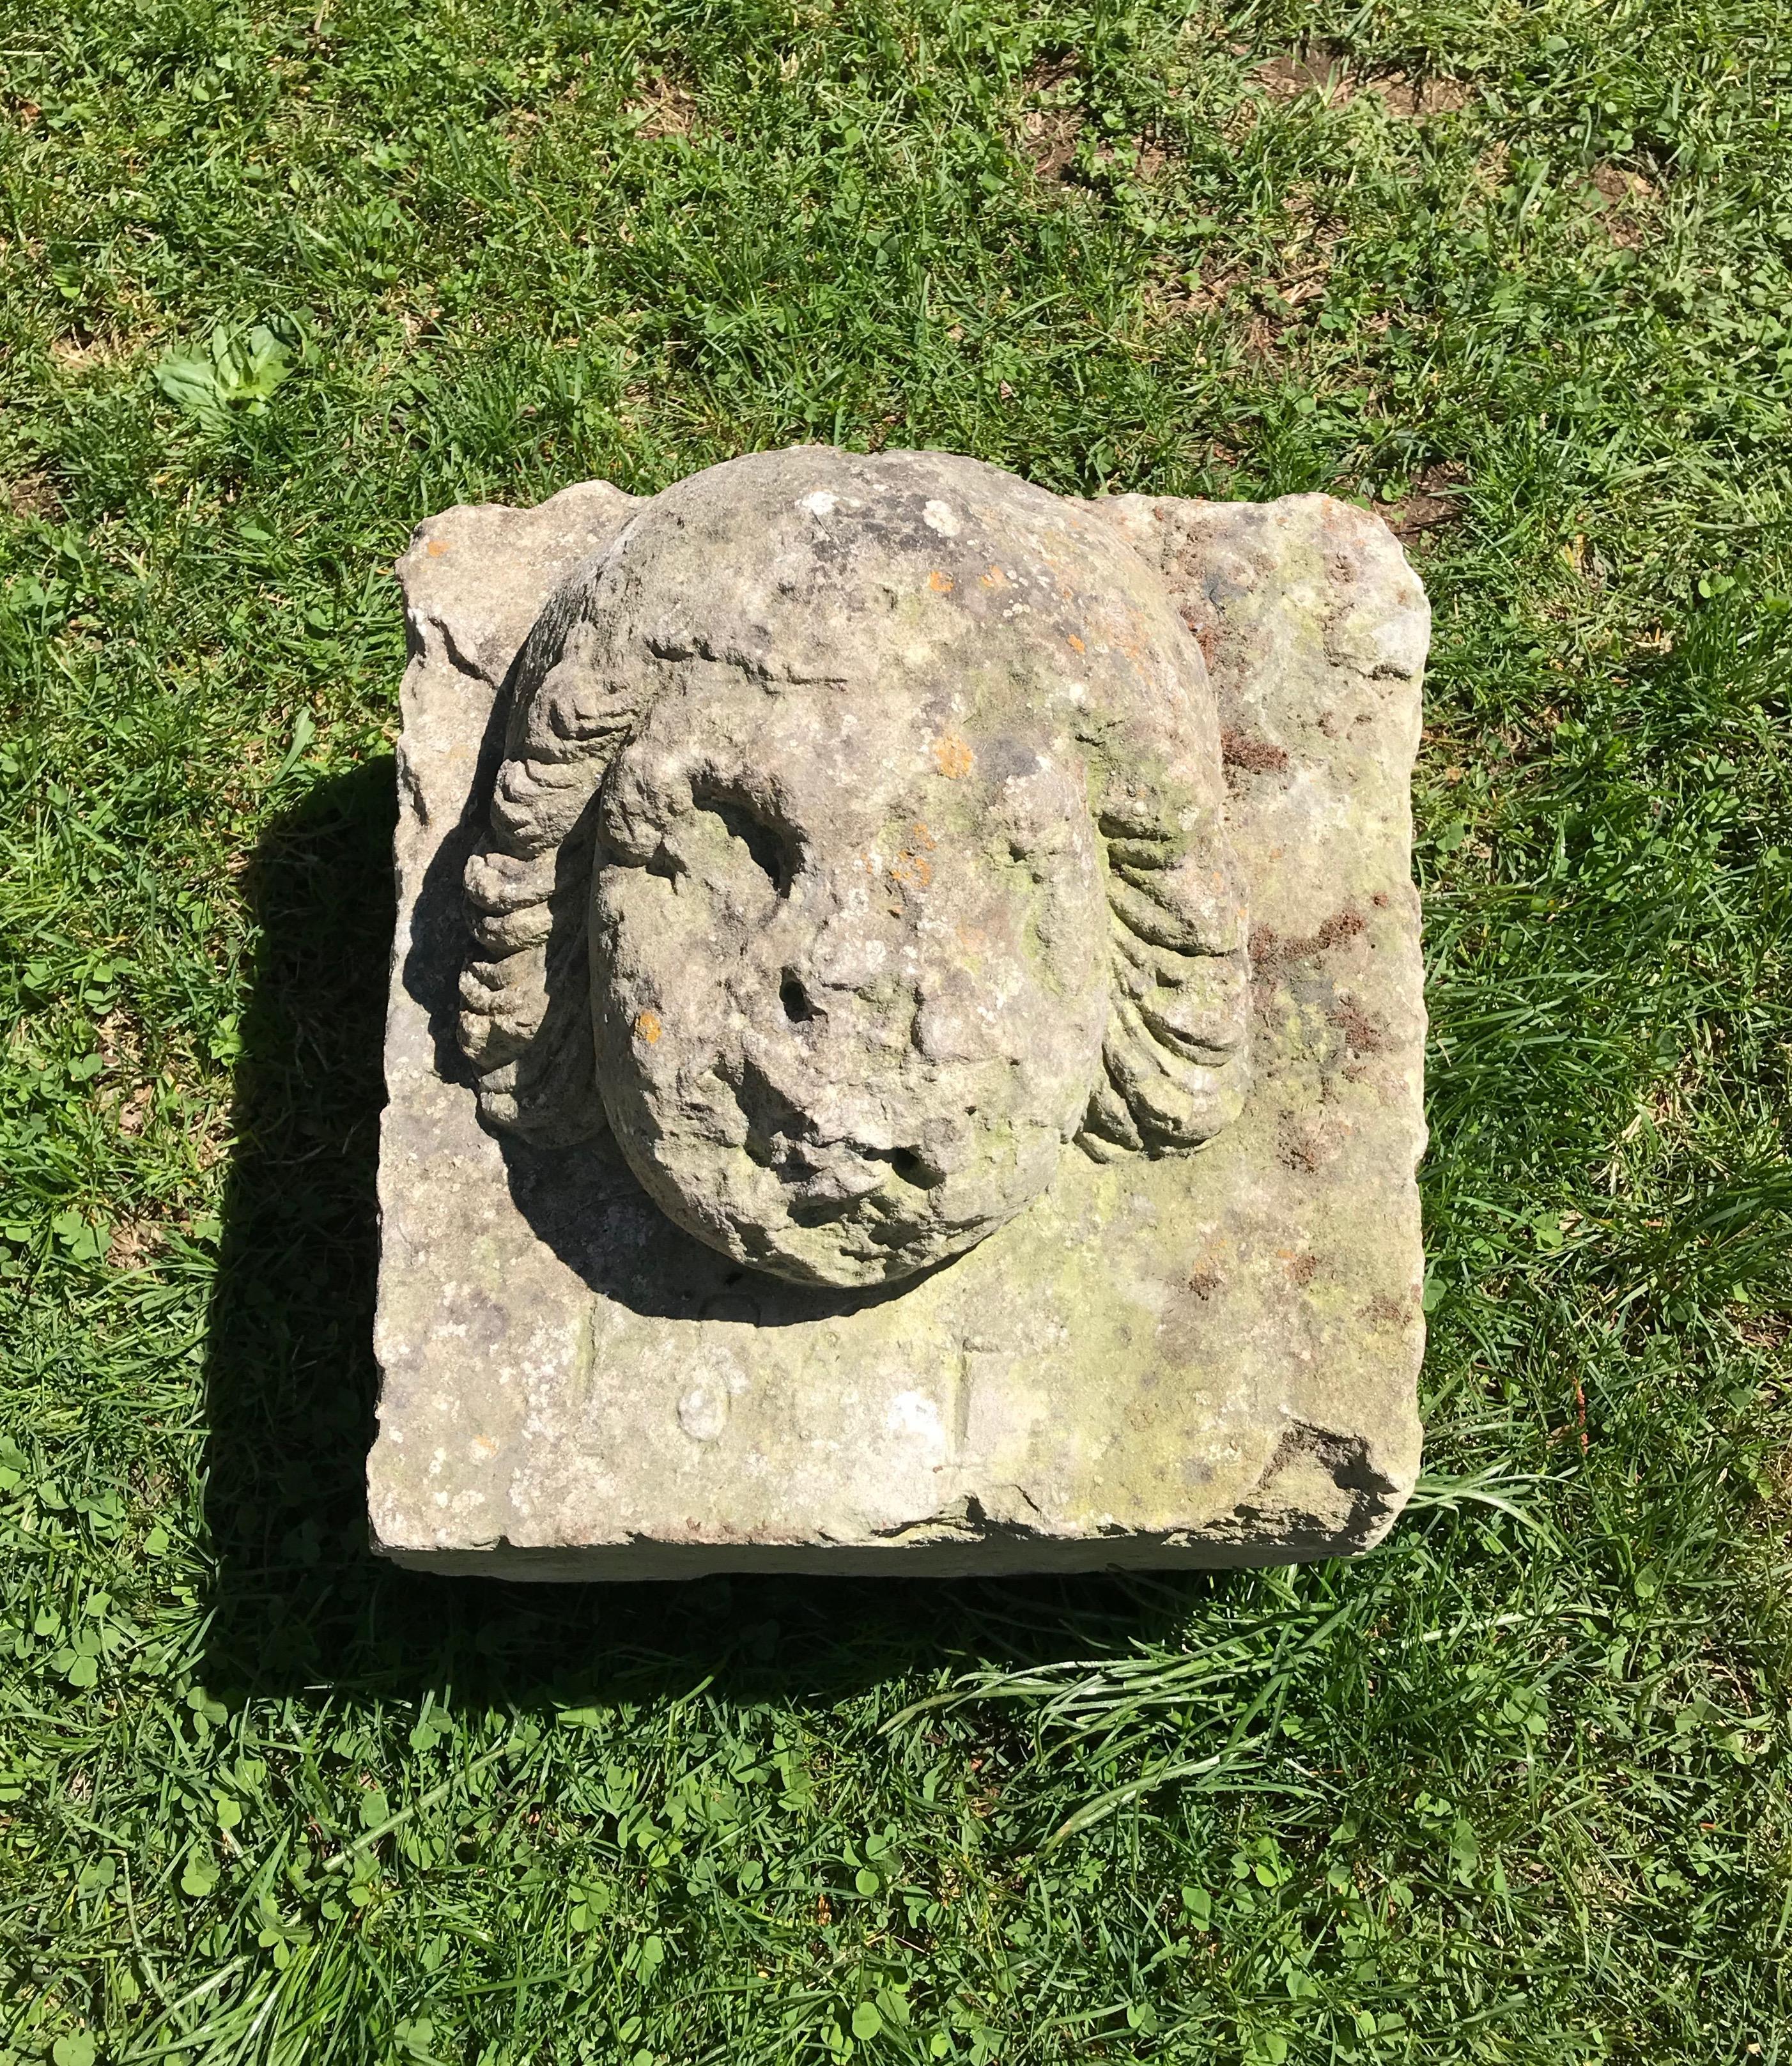 Although there is a date of 1861 incised below the face, we know this piece is much earlier from its form and carving detail. We believe she originally was embedded in a wall over a doorway and could be so again. However, she would also make a